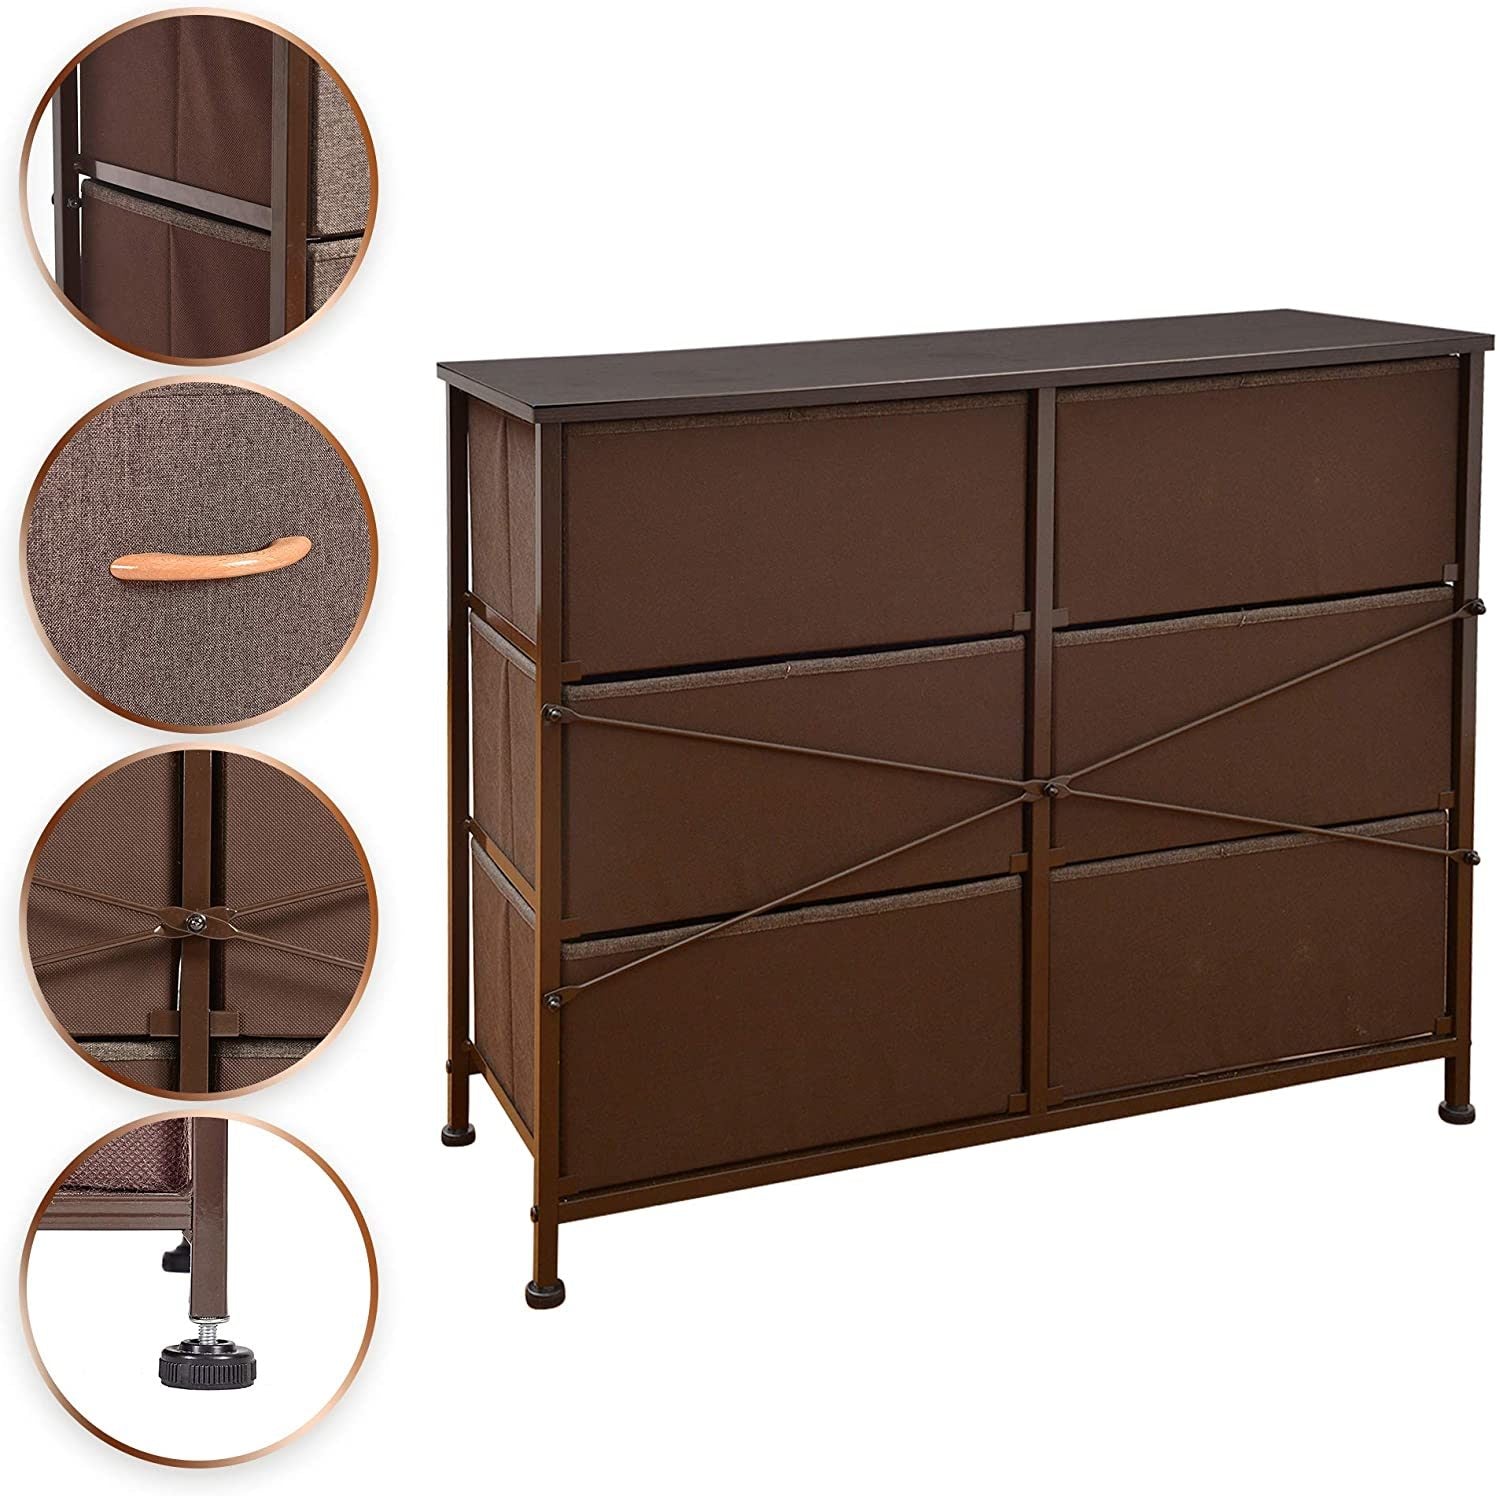 Dresser Closet with 6 Drawers, Storage Tower Unit for Bedroom, Hallway, Closet, Office Organization, Wood Top, Easy Pull Fabric Bins - Brown